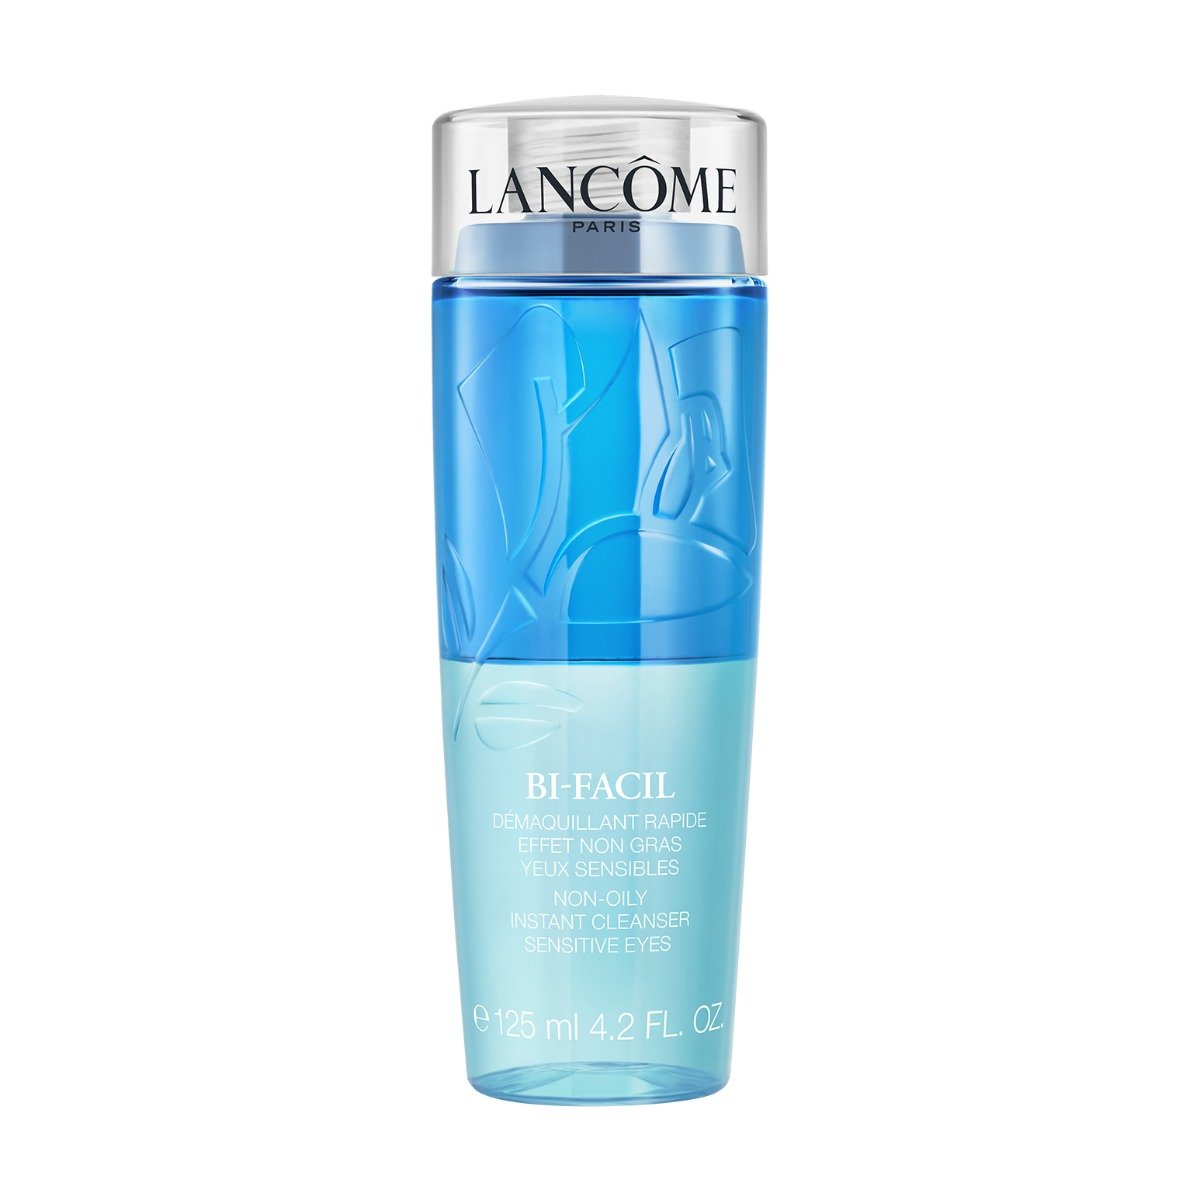 Lancome Bi-Facil Non-Oily Instant Cleanser Makeup Remover - 125ml - Bloom Pharmacy